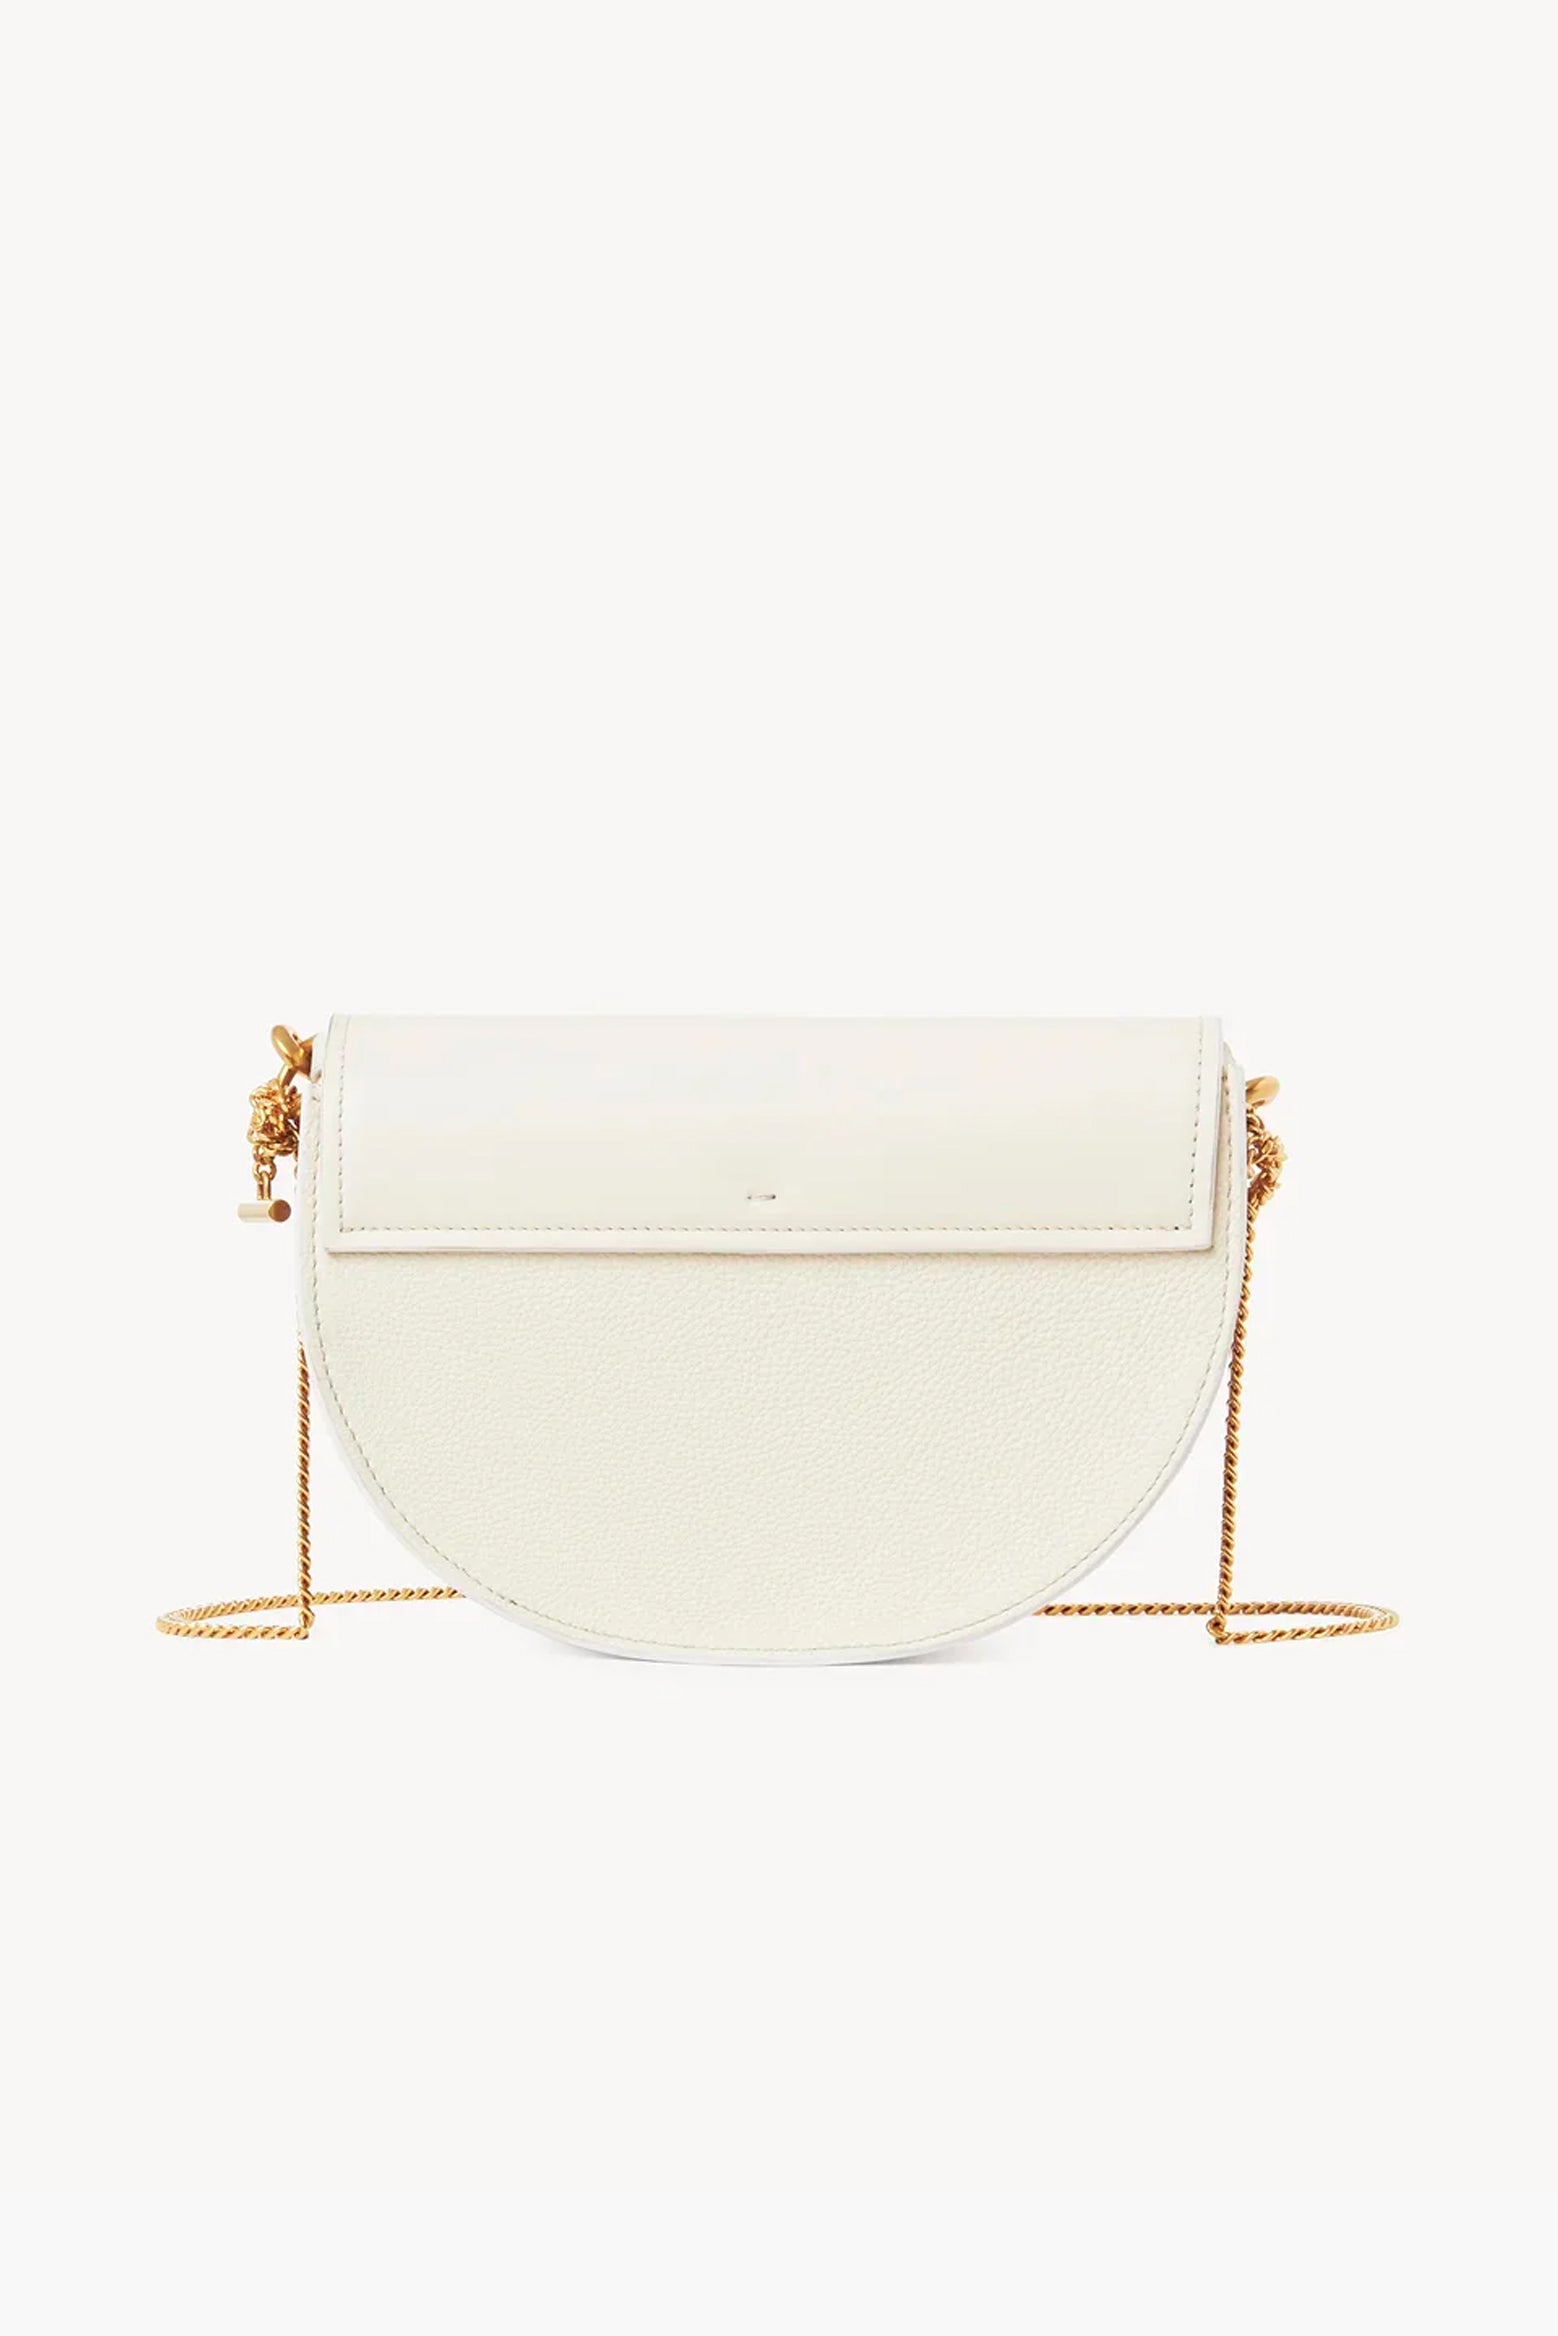 The Chloe Marcie Chain Flap Bag in Misty Ivory available at The New Trend Australia